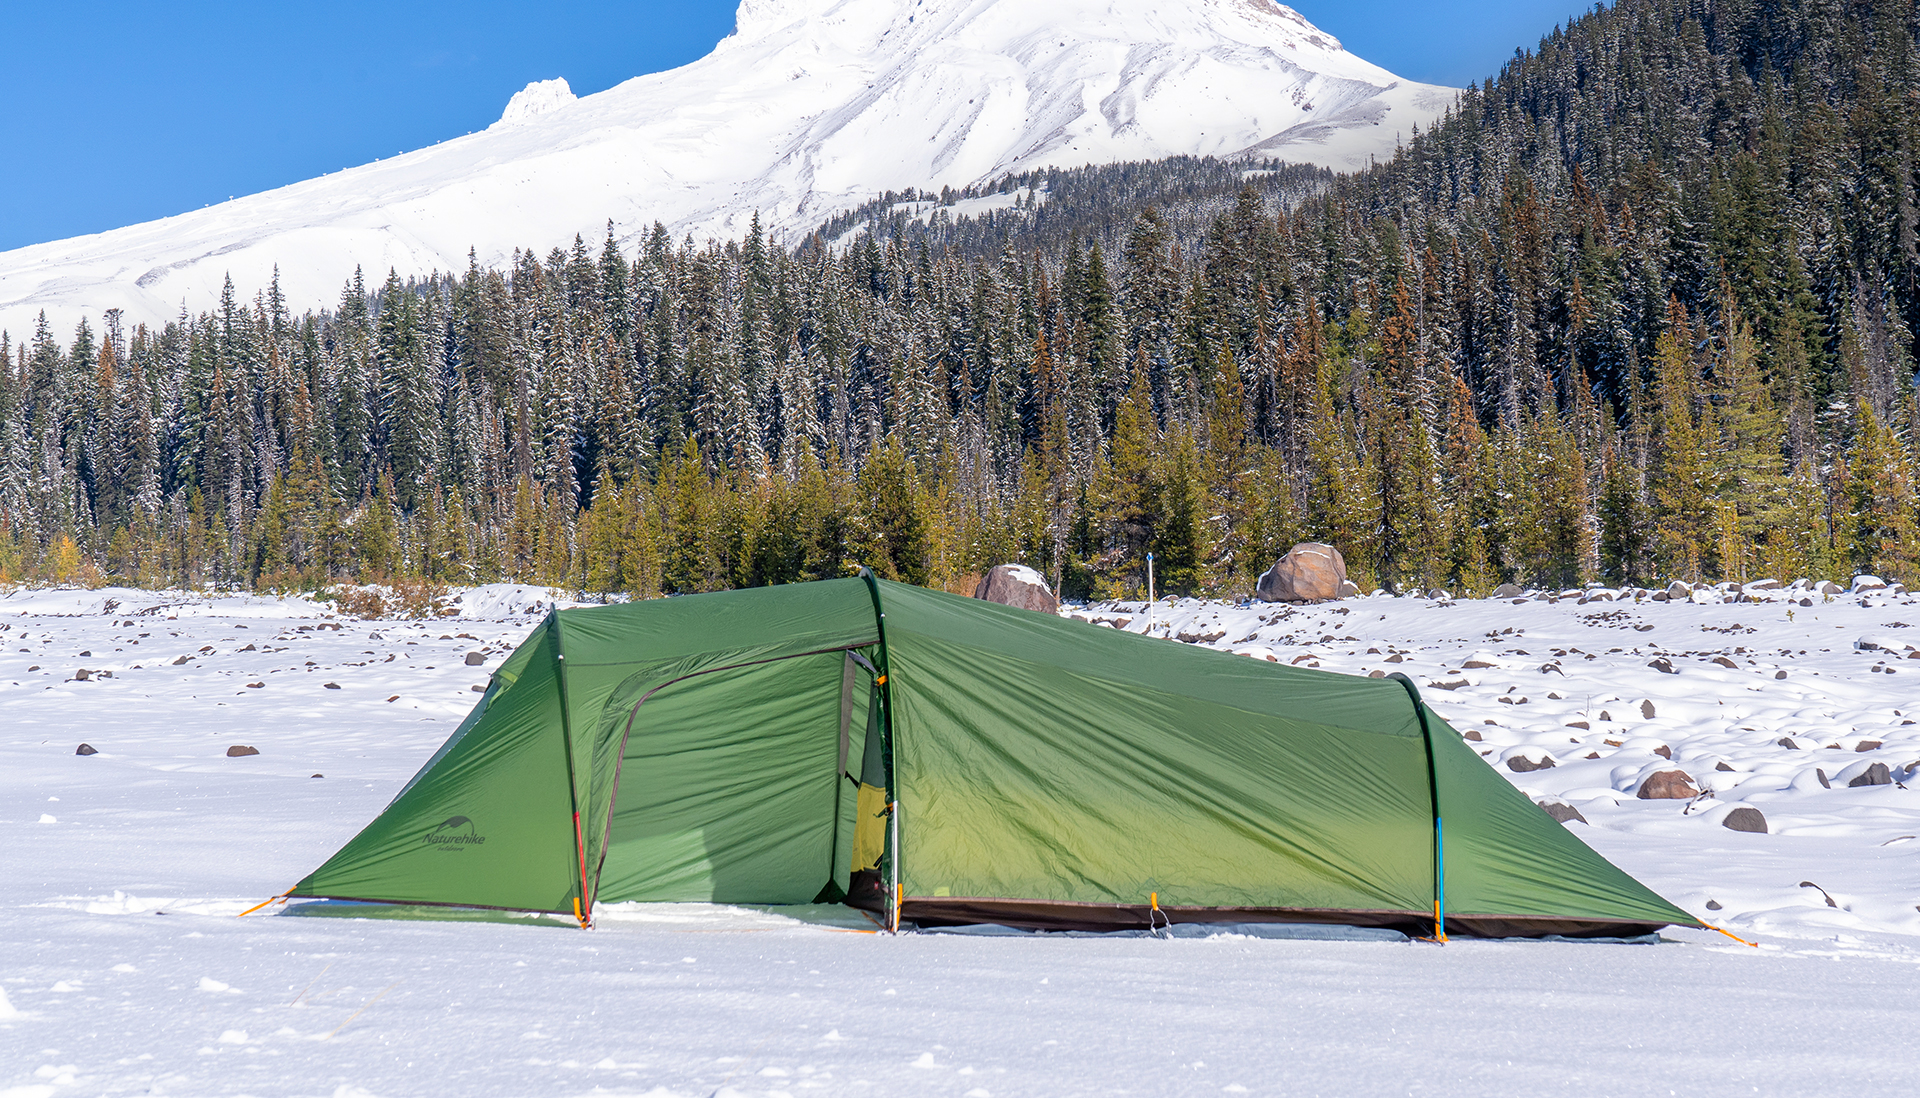 This picture shows a tent camping in winter.